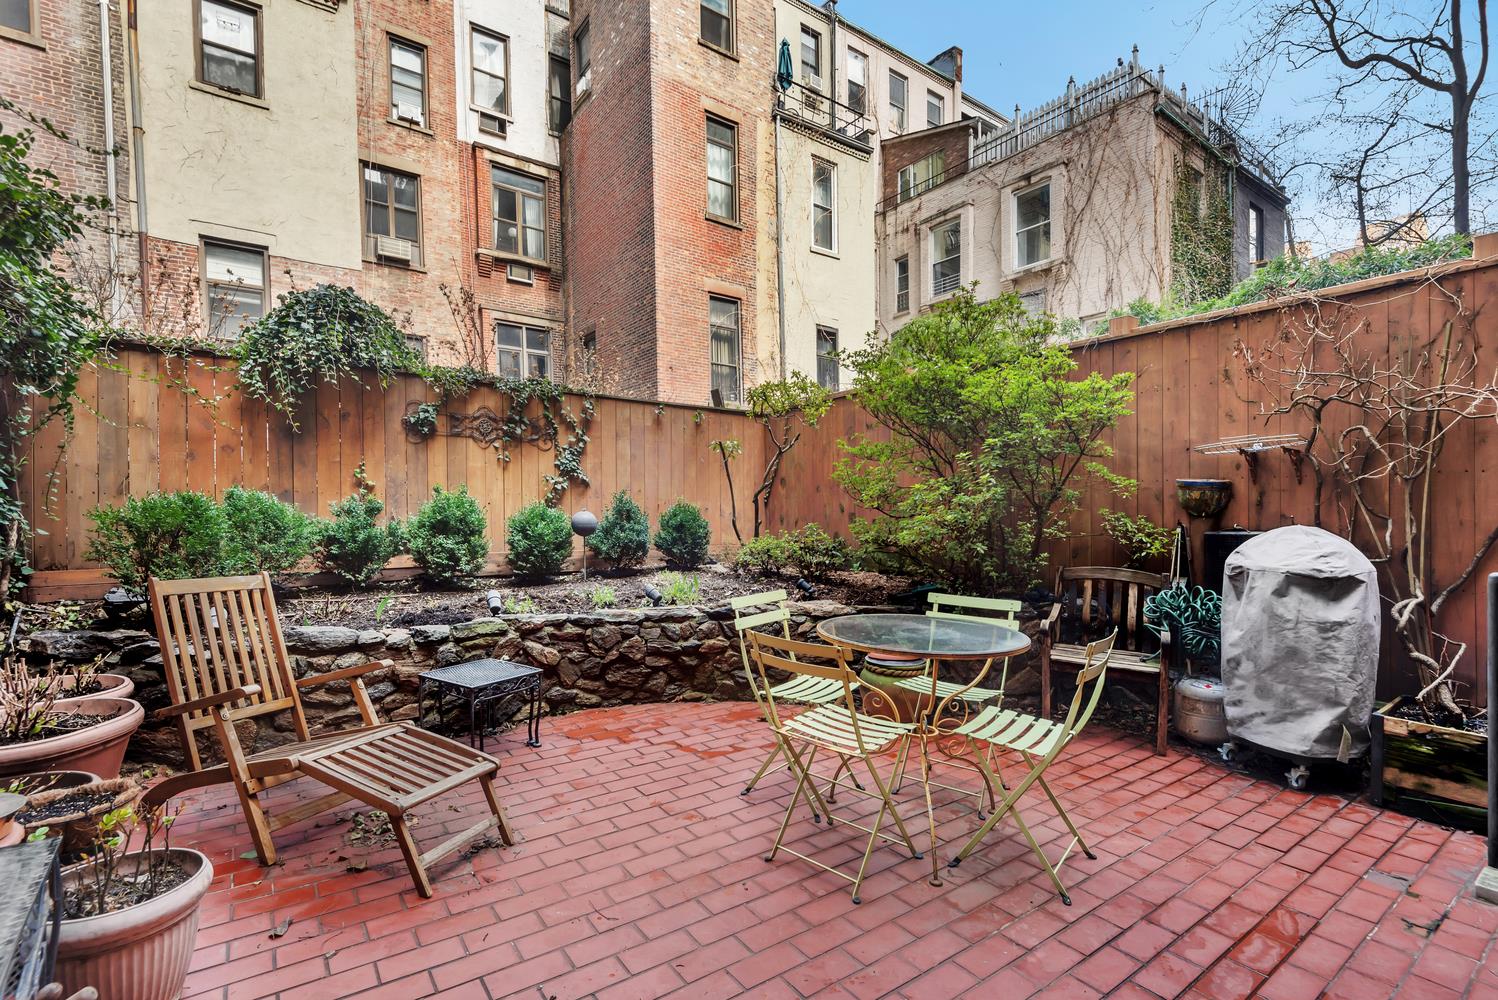 129 West 70th Street Garden, Lincoln Sq, Upper West Side, NYC - 4 Bedrooms  
3 Bathrooms  
8 Rooms - 